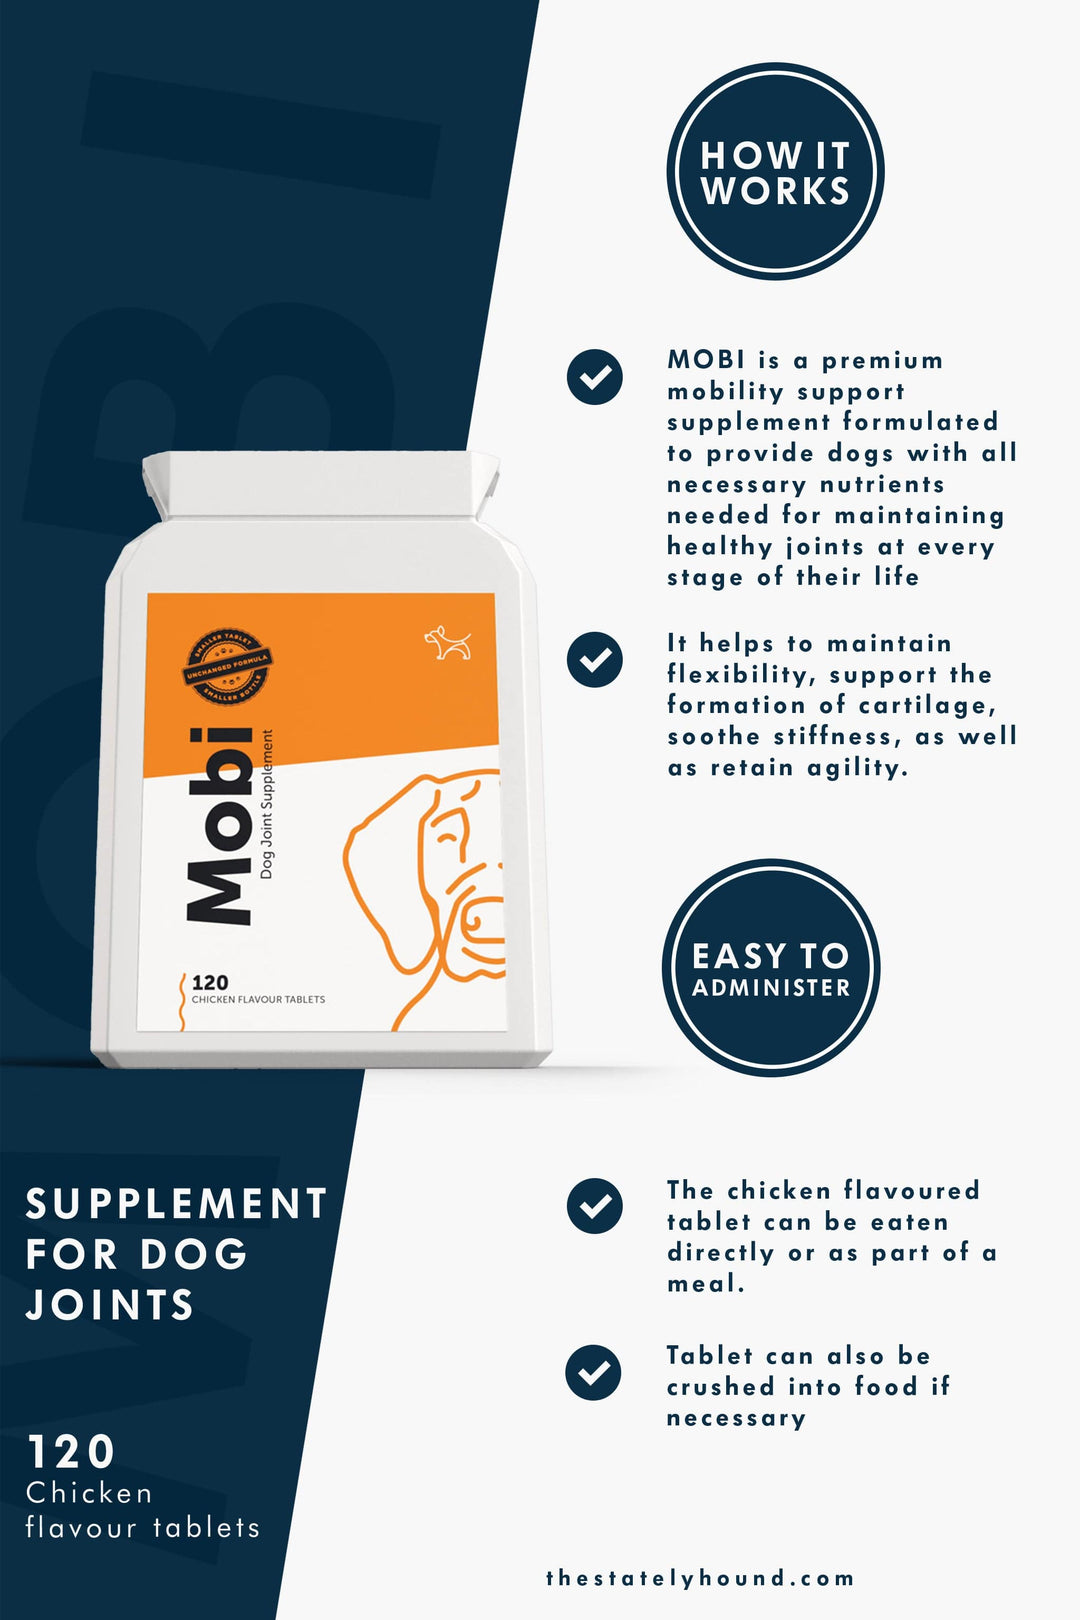 Hip and Joint Mobility, Glucosamine & Turmeric Supplement for Dogs